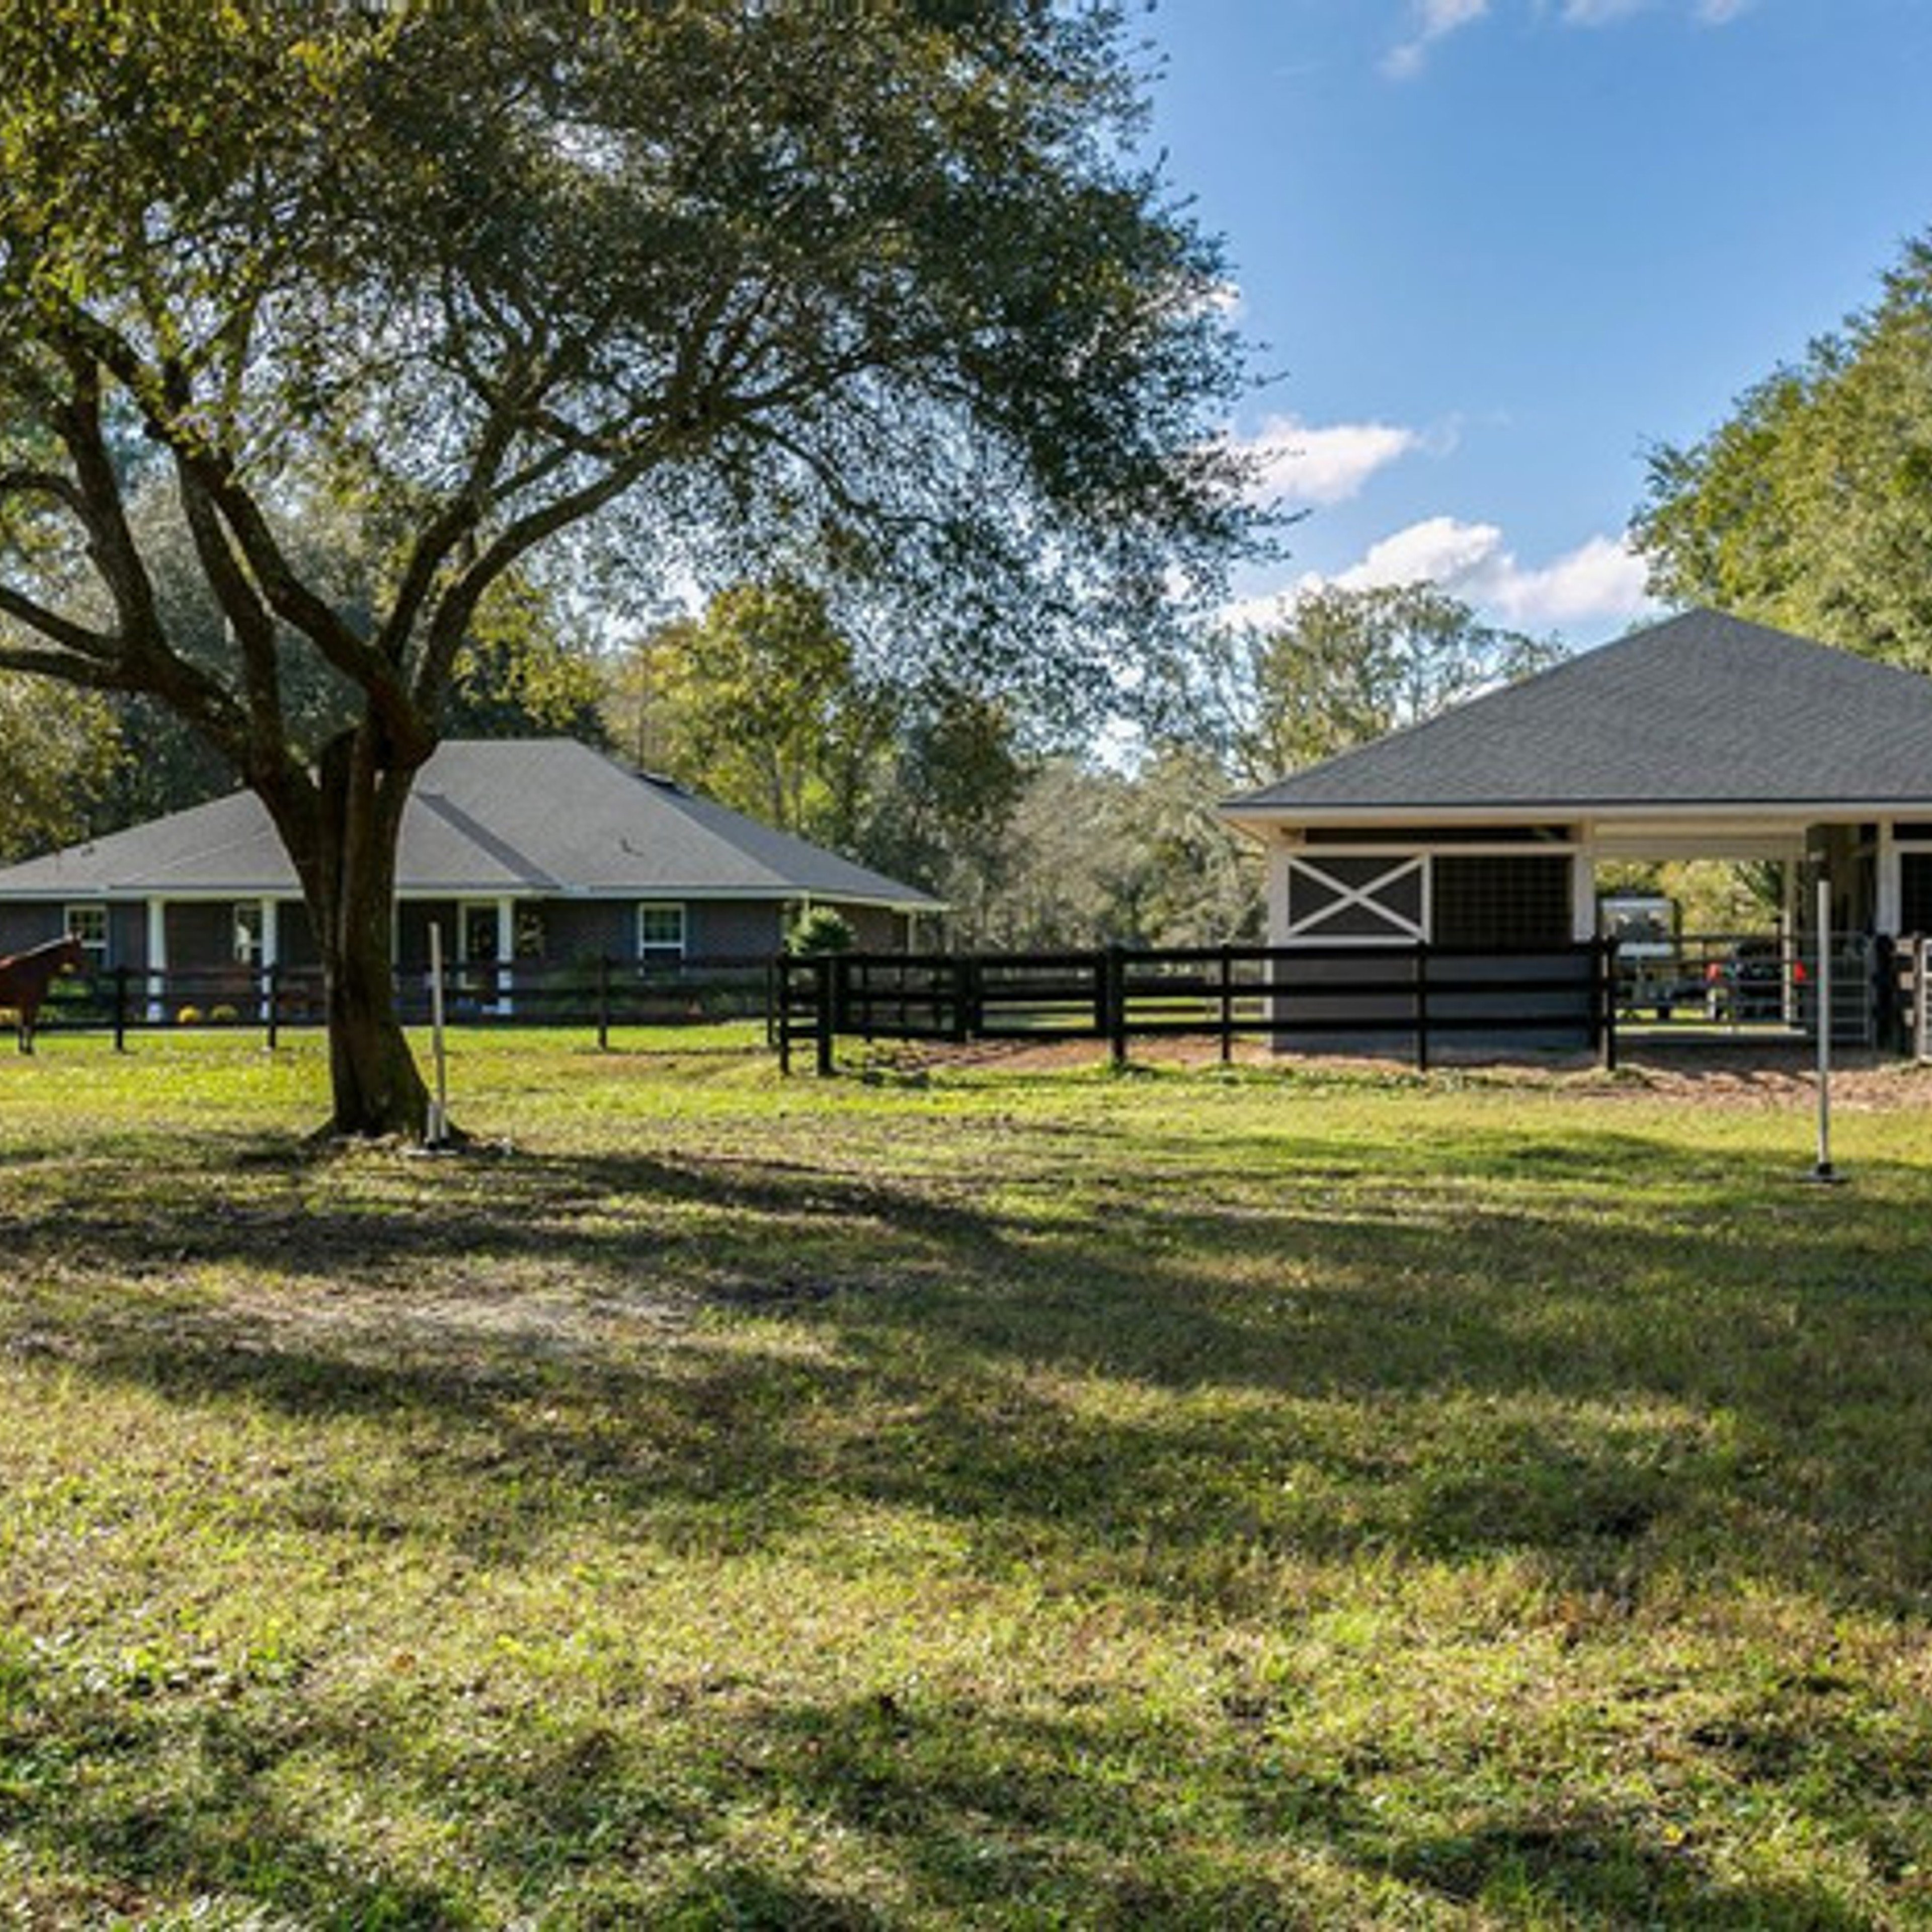 House Sitter in NE Jacksonville, FL needed for Oct - Must know dogs, cats, and horsemanship